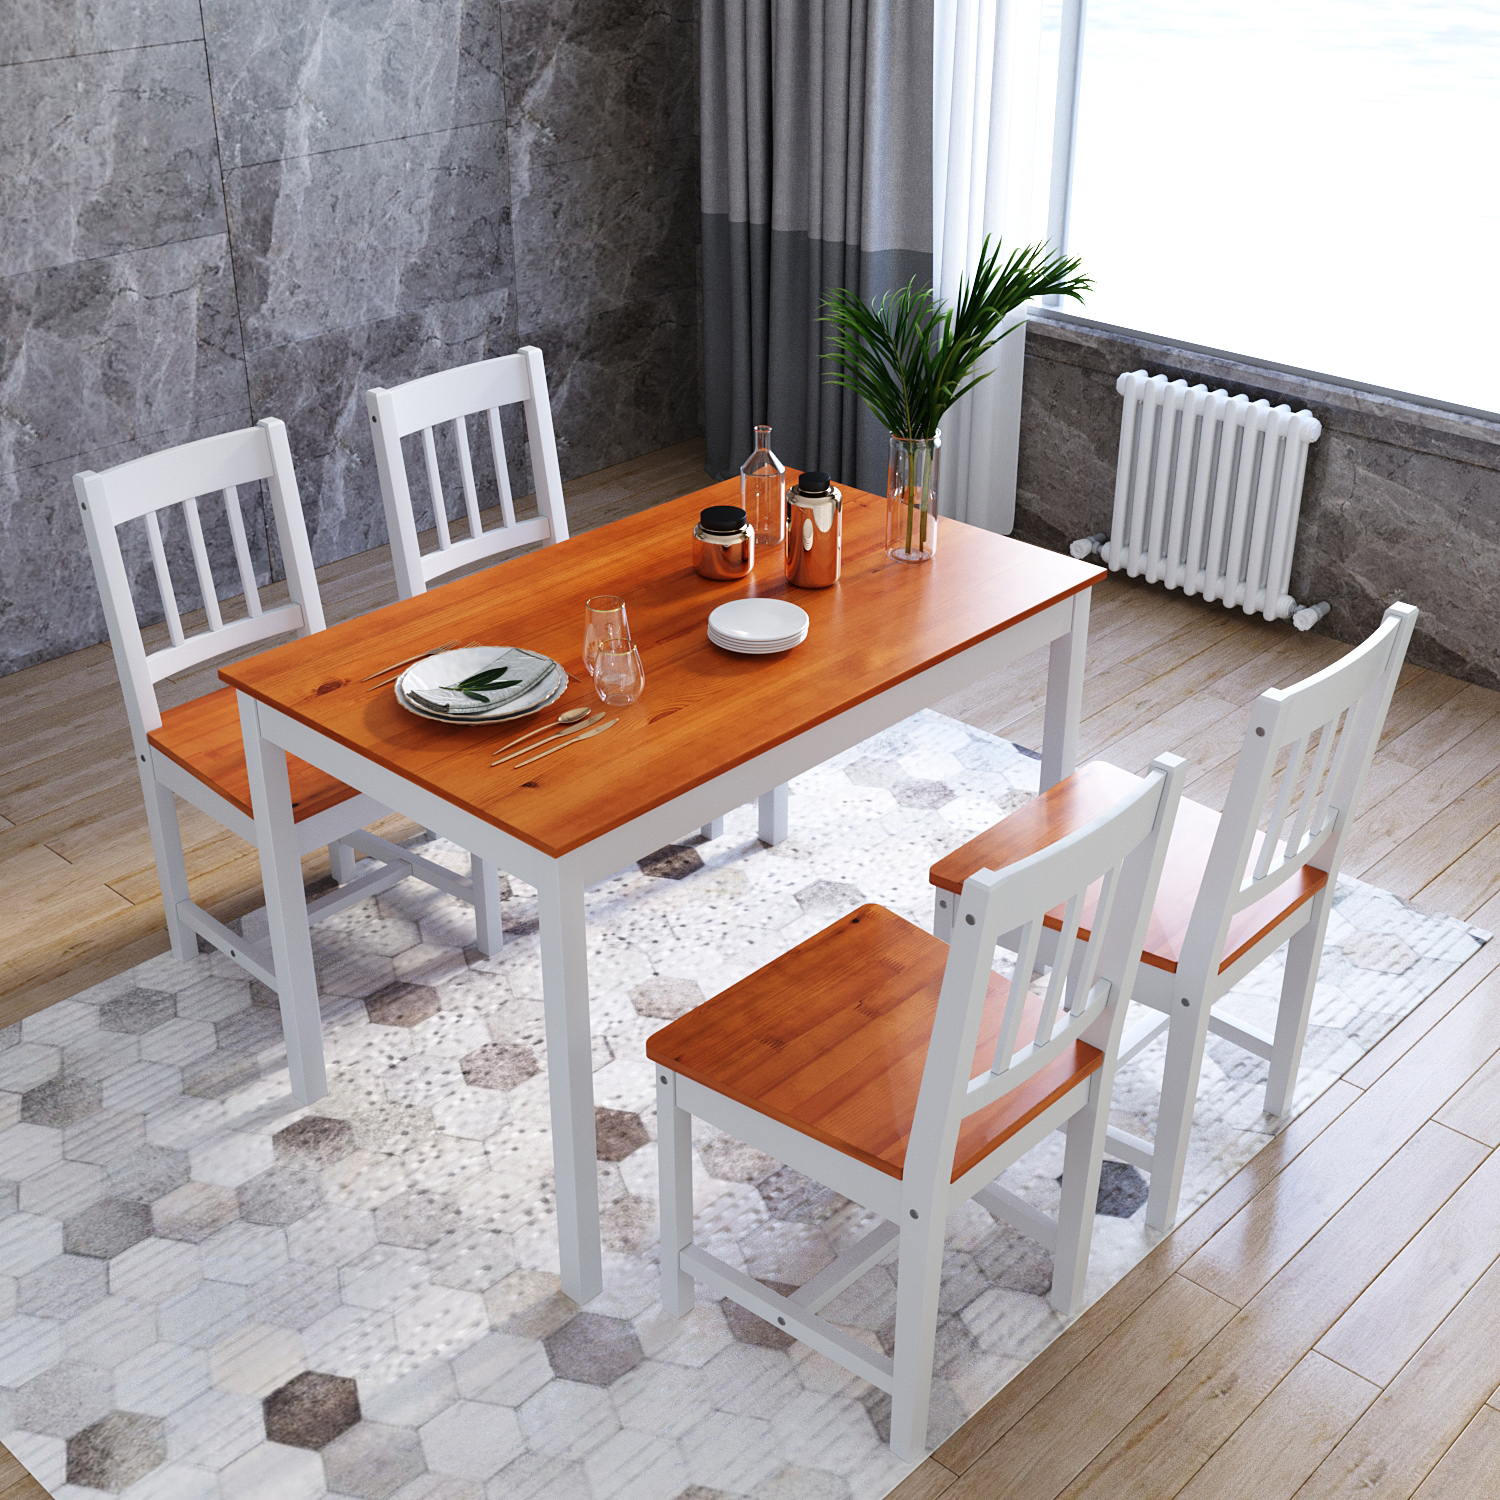 Kitchen Dining Table And 4 Chairs Seater Solid Wood Modern Furniture Sets White EBay